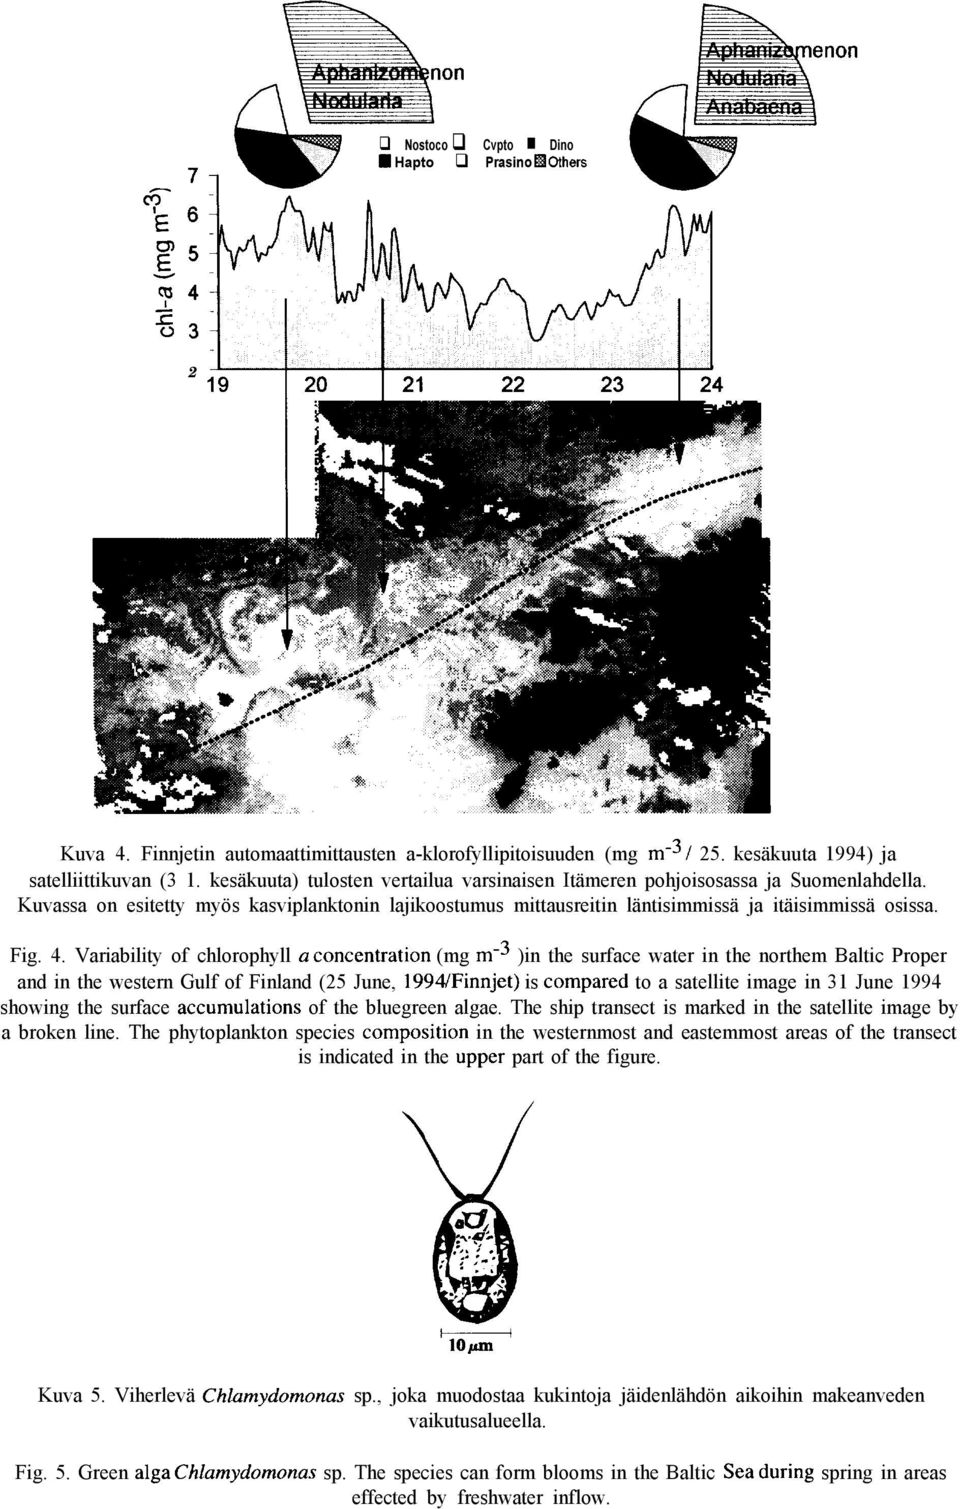 Variability of chlorophyll a toncentration (mg rne3 )in the surface water in the northem Baltic Proper and in the western Gulf of Finland (25 June, 1994/Finnjet) is compared to a satellite image in